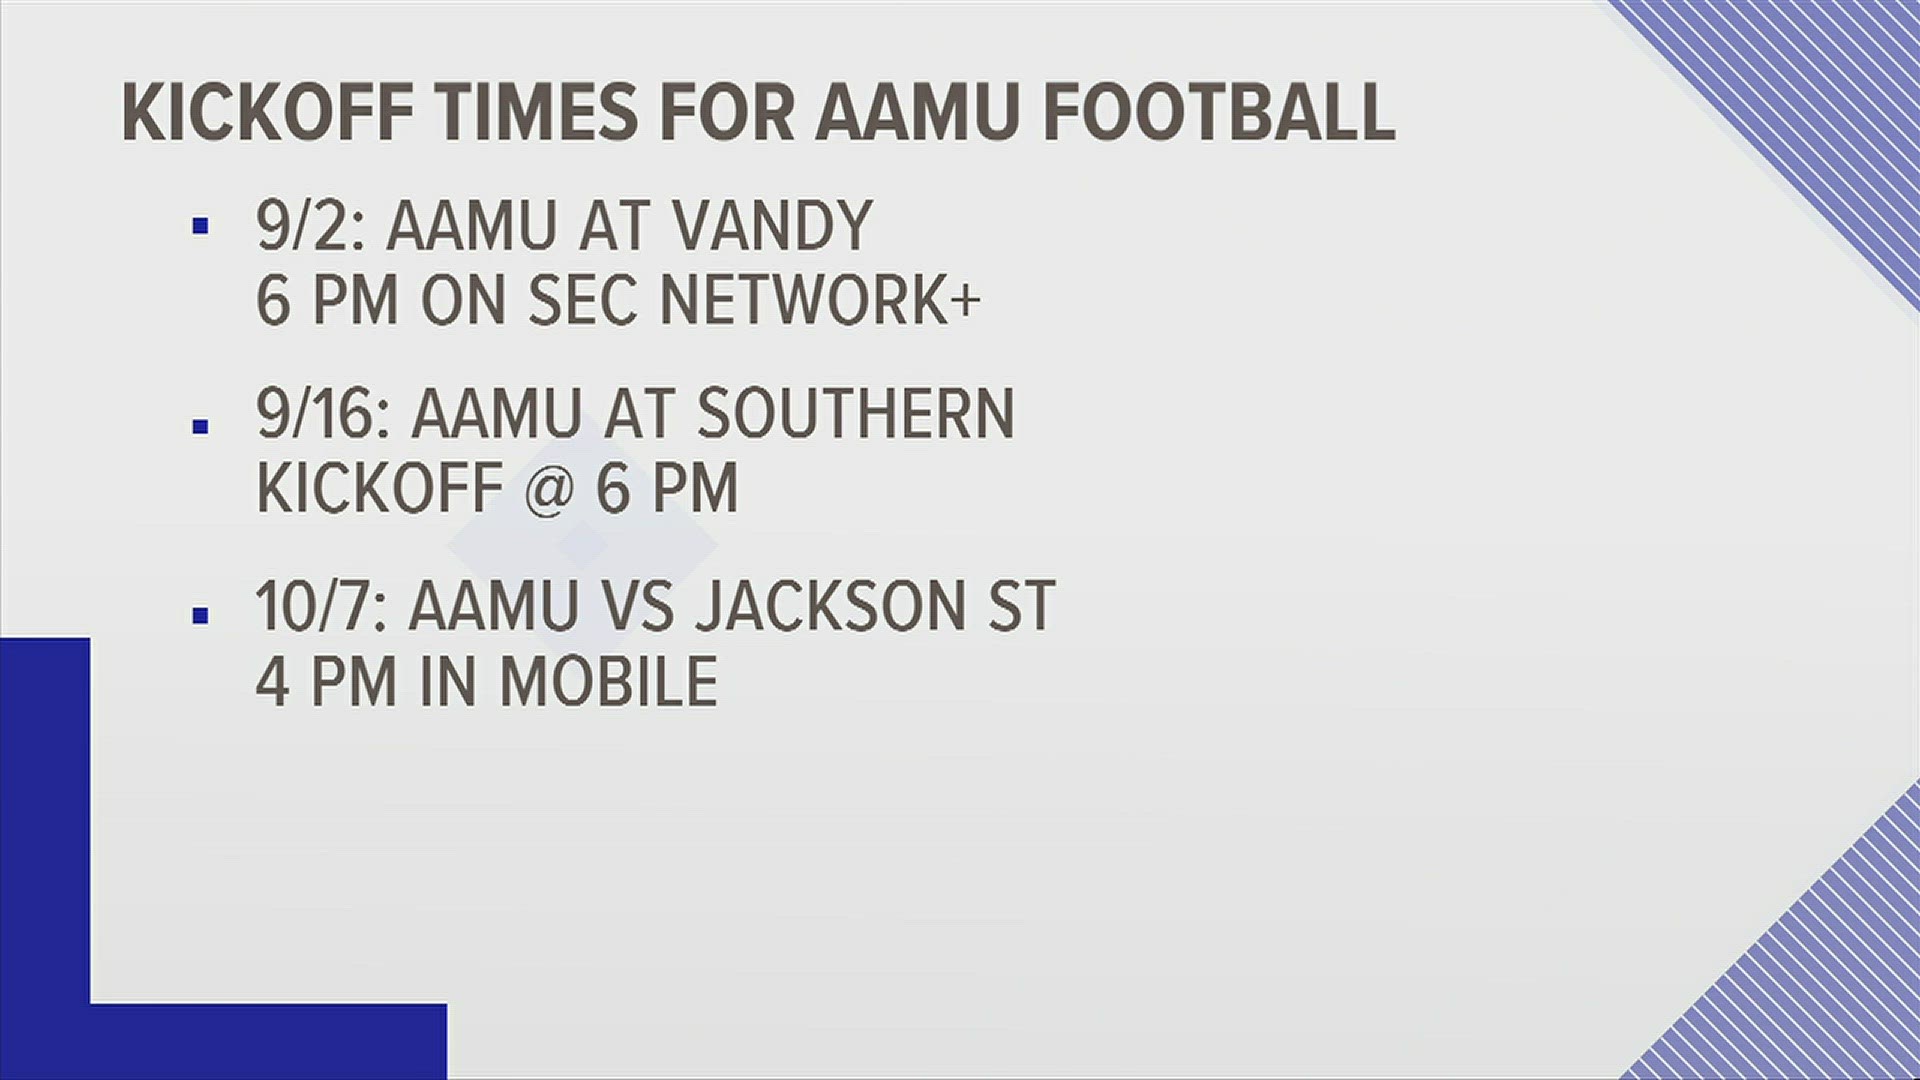 Kickoff times for Alabama A&M's games against Vanderbilt, Southern University and Jackson State were unveiled this week.